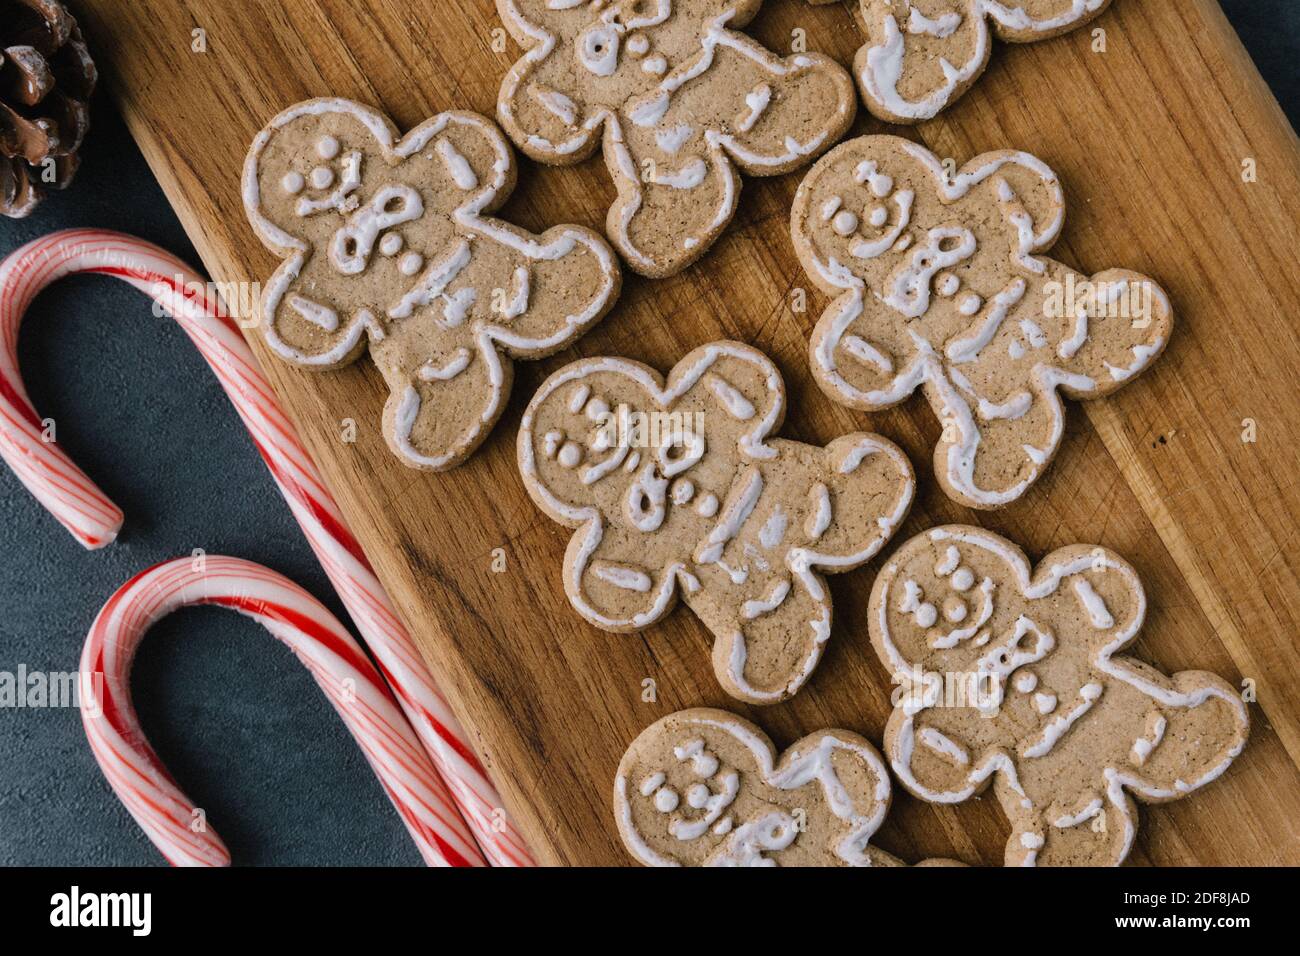 Christmas Gingerbread Man Cookies on Wooden Board With Ribbons, Pine Cones, Bells, and Ornaments, On Dark Slate Texture Stock Photo